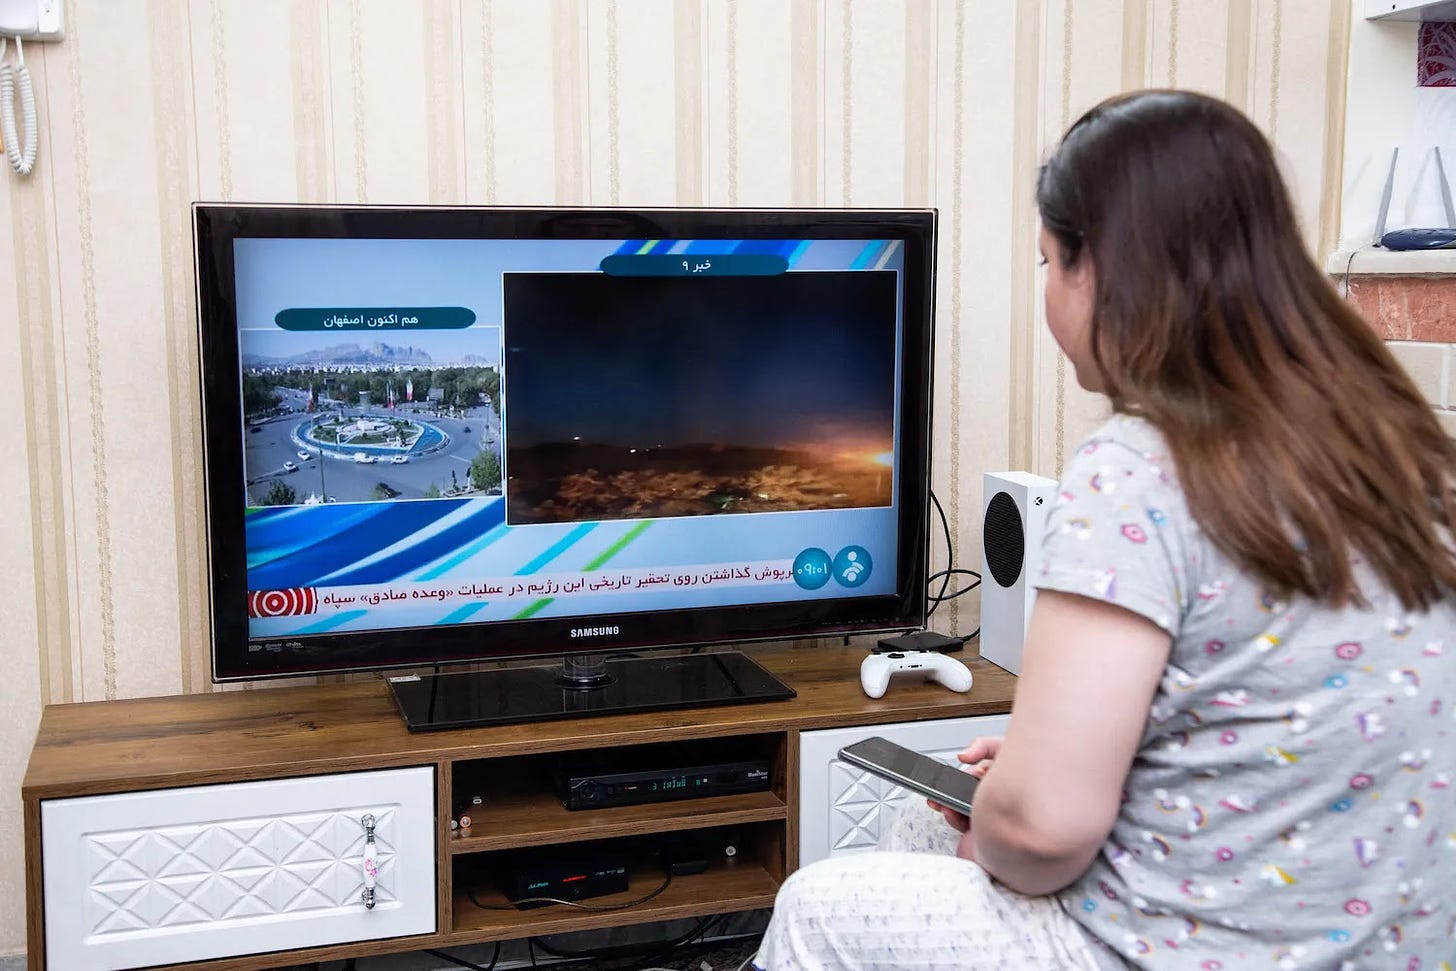 A woman watches an Iranian news TV channel covering an “explosion” near Isfahan, Iran.